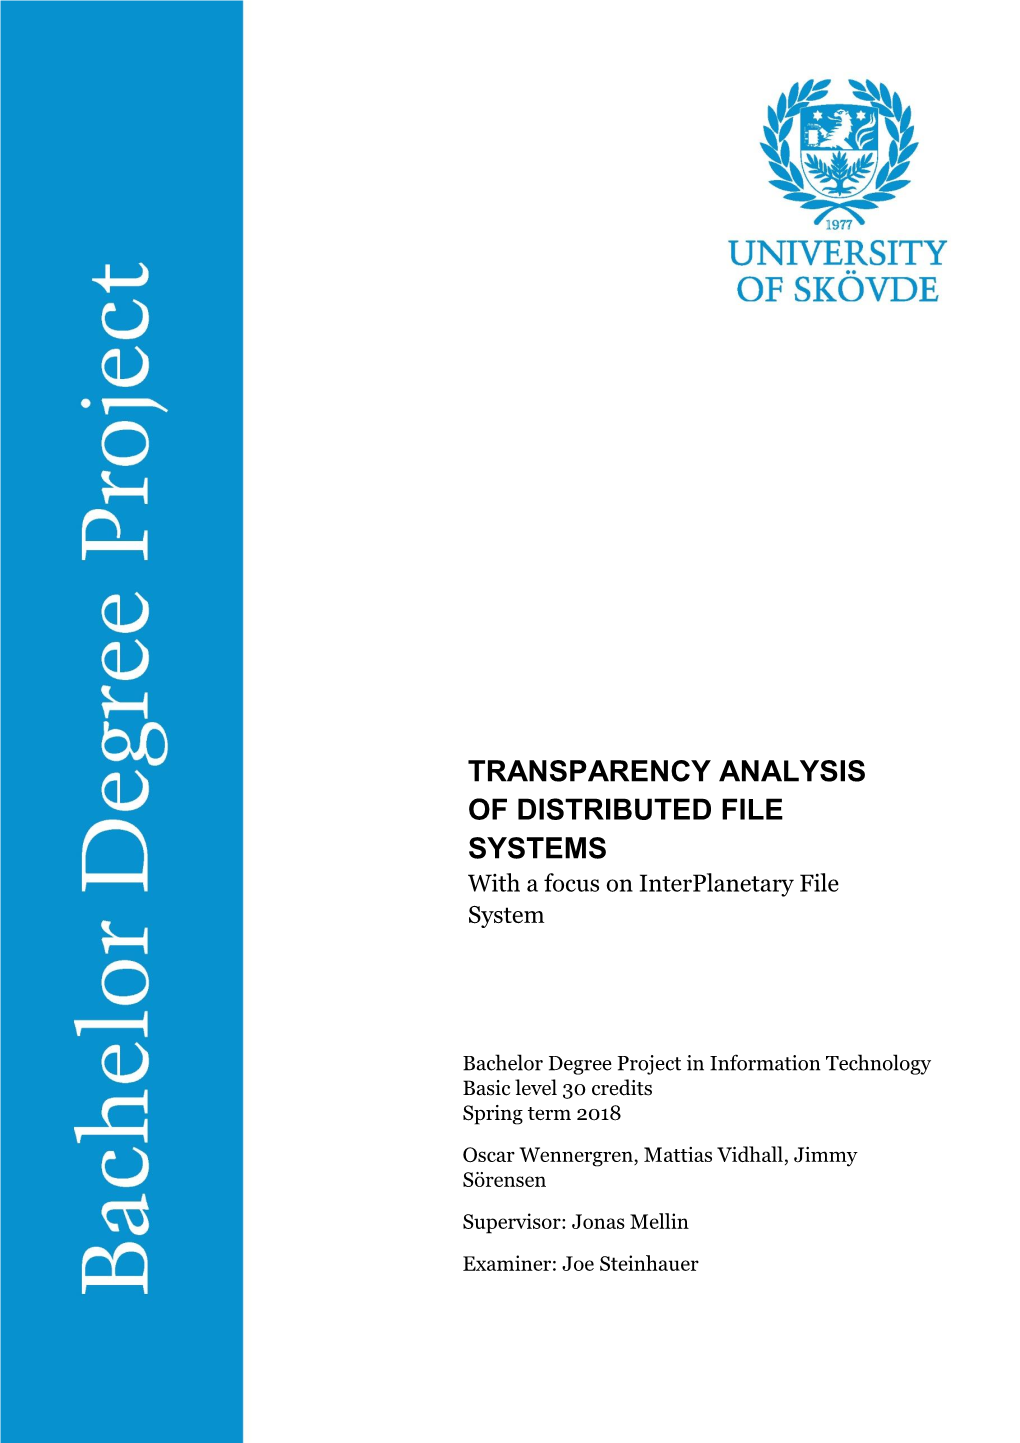 TRANSPARENCY ANALYSIS of DISTRIBUTED FILE SYSTEMS with a Focus on Interplanetary File System